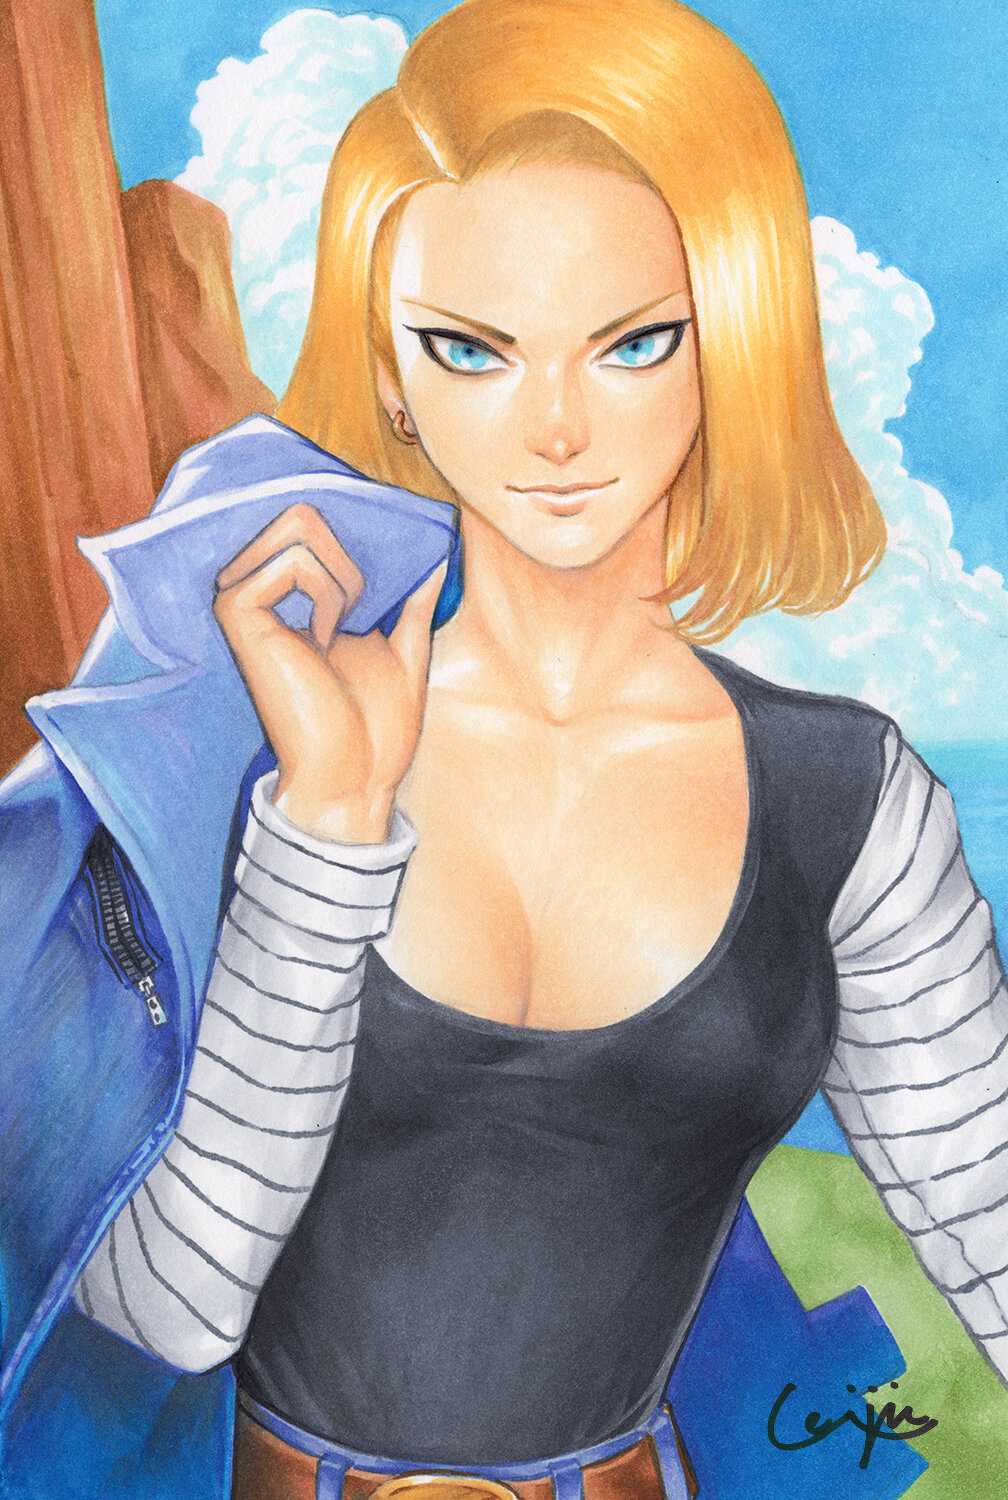 Inktober day 3: Android 18 from Dragon Ball